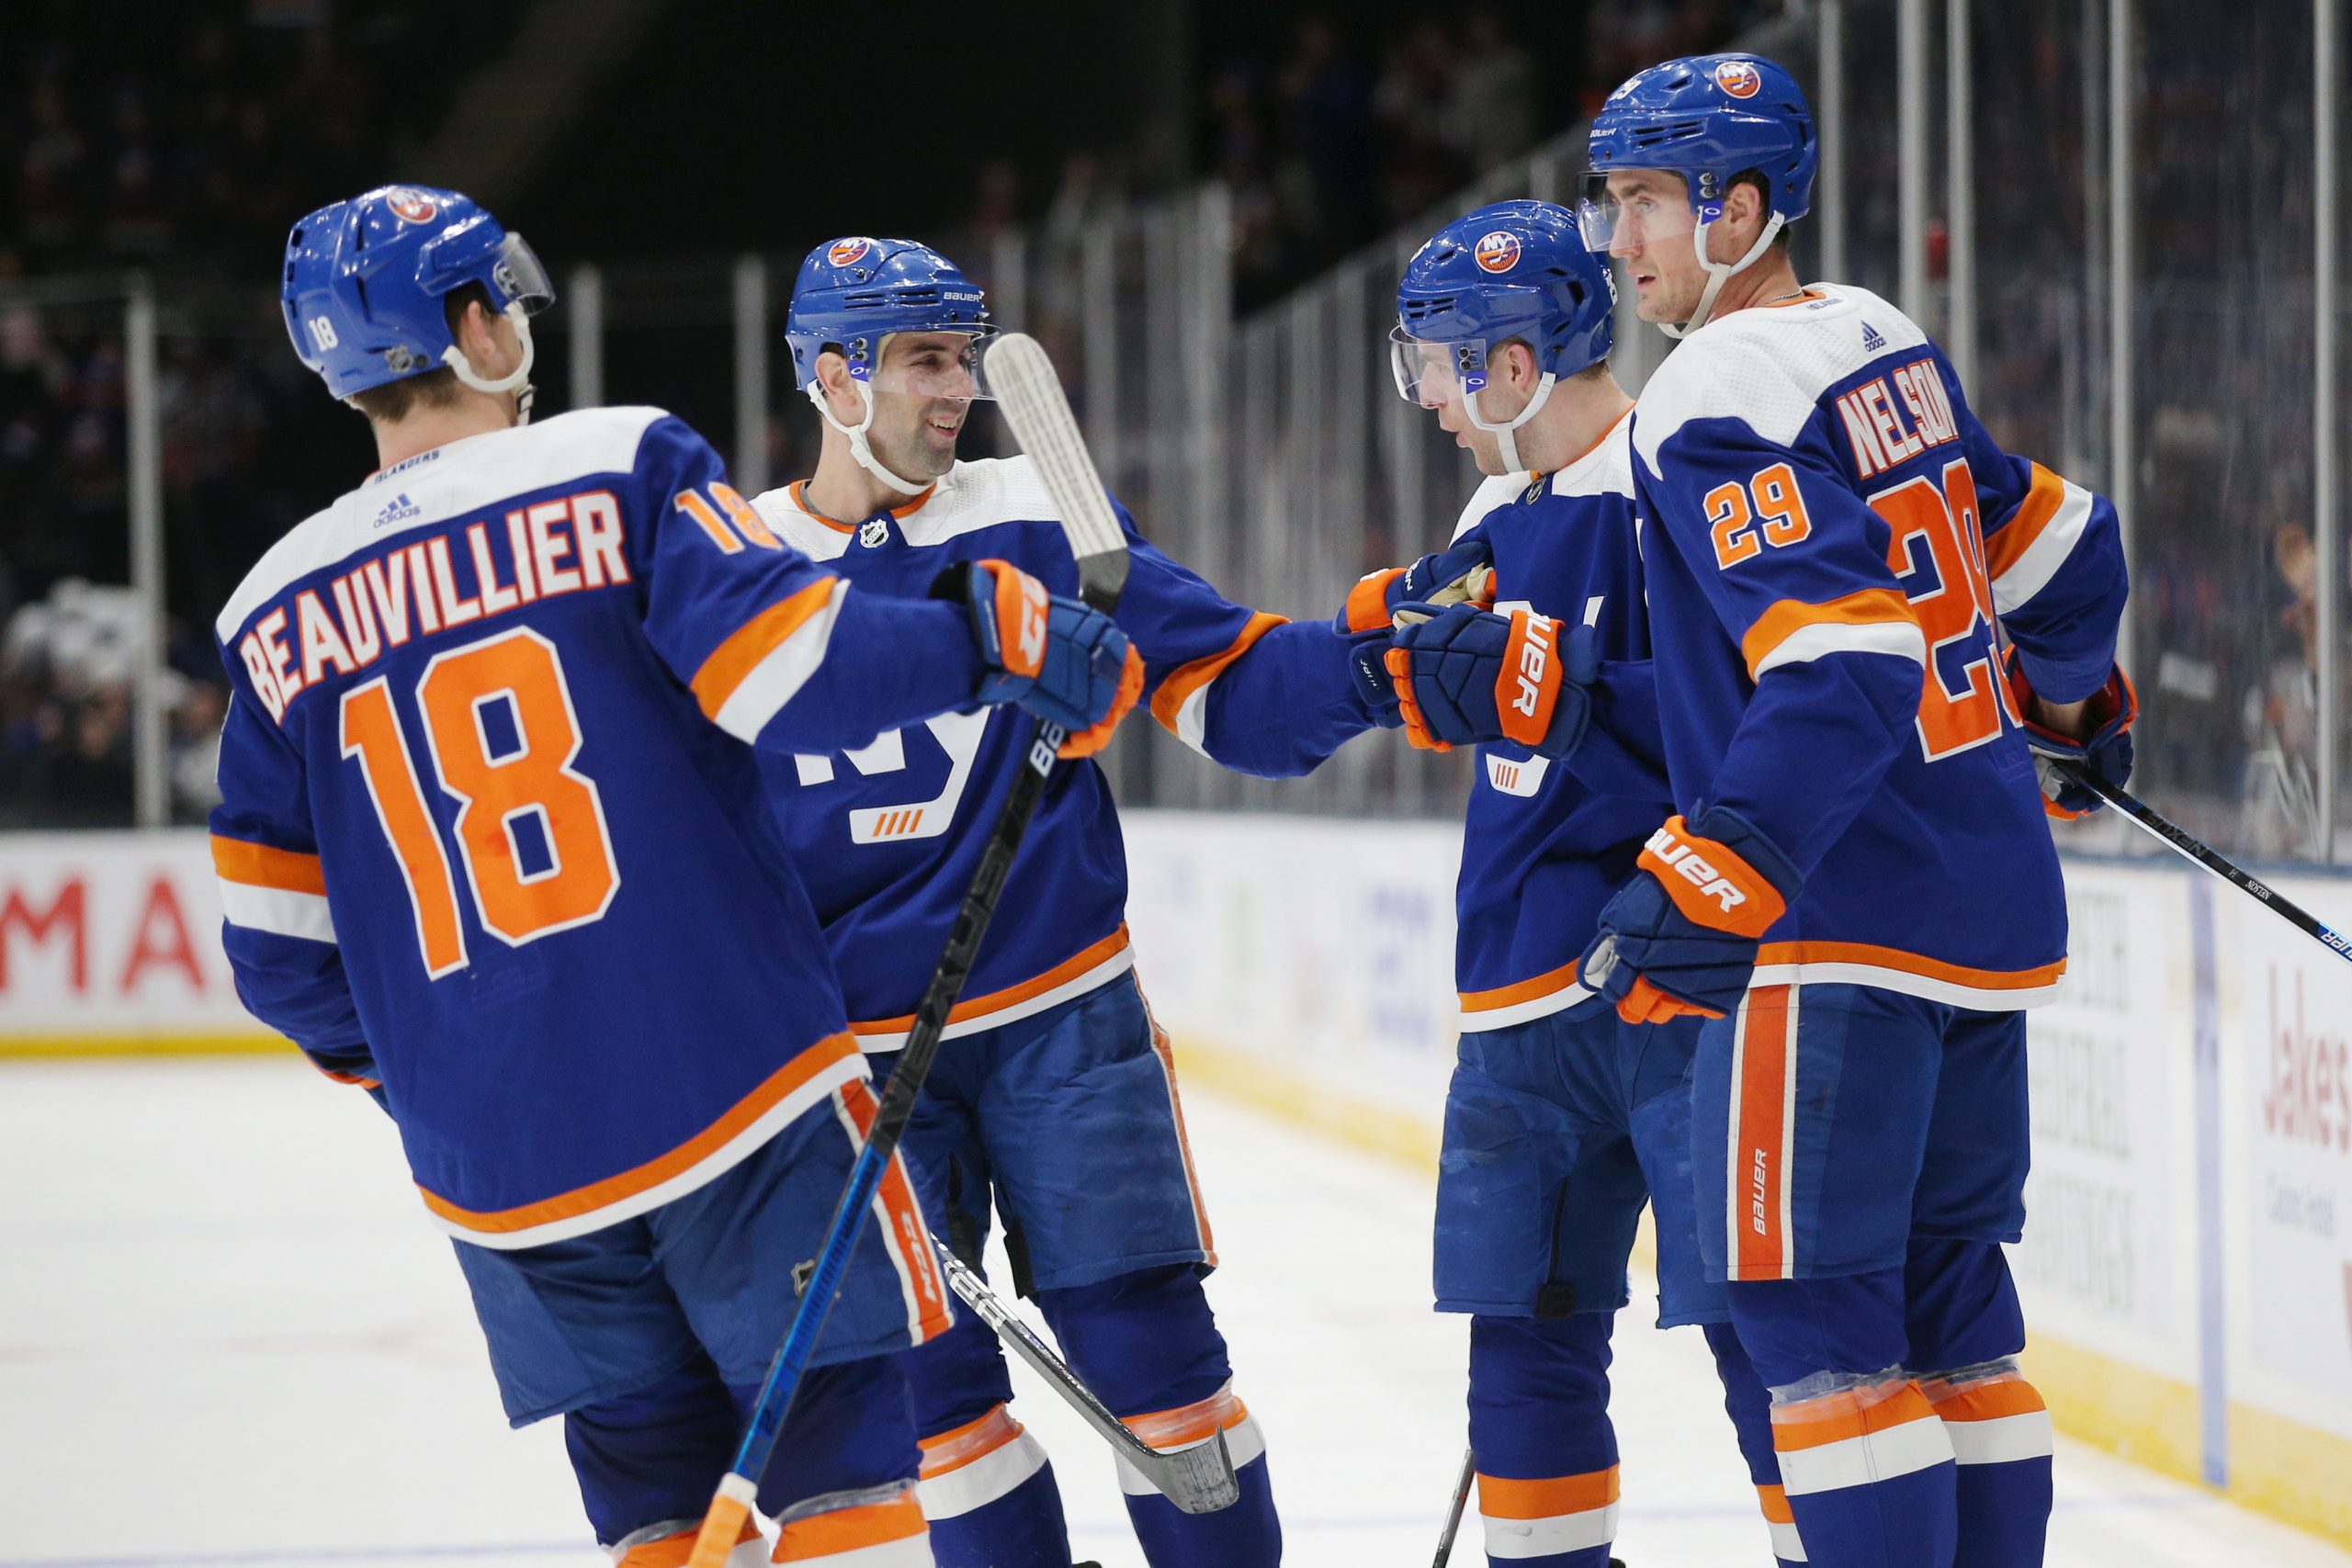 Feb 23, 2020; Uniondale, New York, USA; New York Islanders defenseman Devon Toews (25) celebrates his goal against the San Jose Sharks with teammates during the second period at Nassau Veterans Memorial Coliseum. Mandatory Credit: Brad Penner-USA TODAY Sports